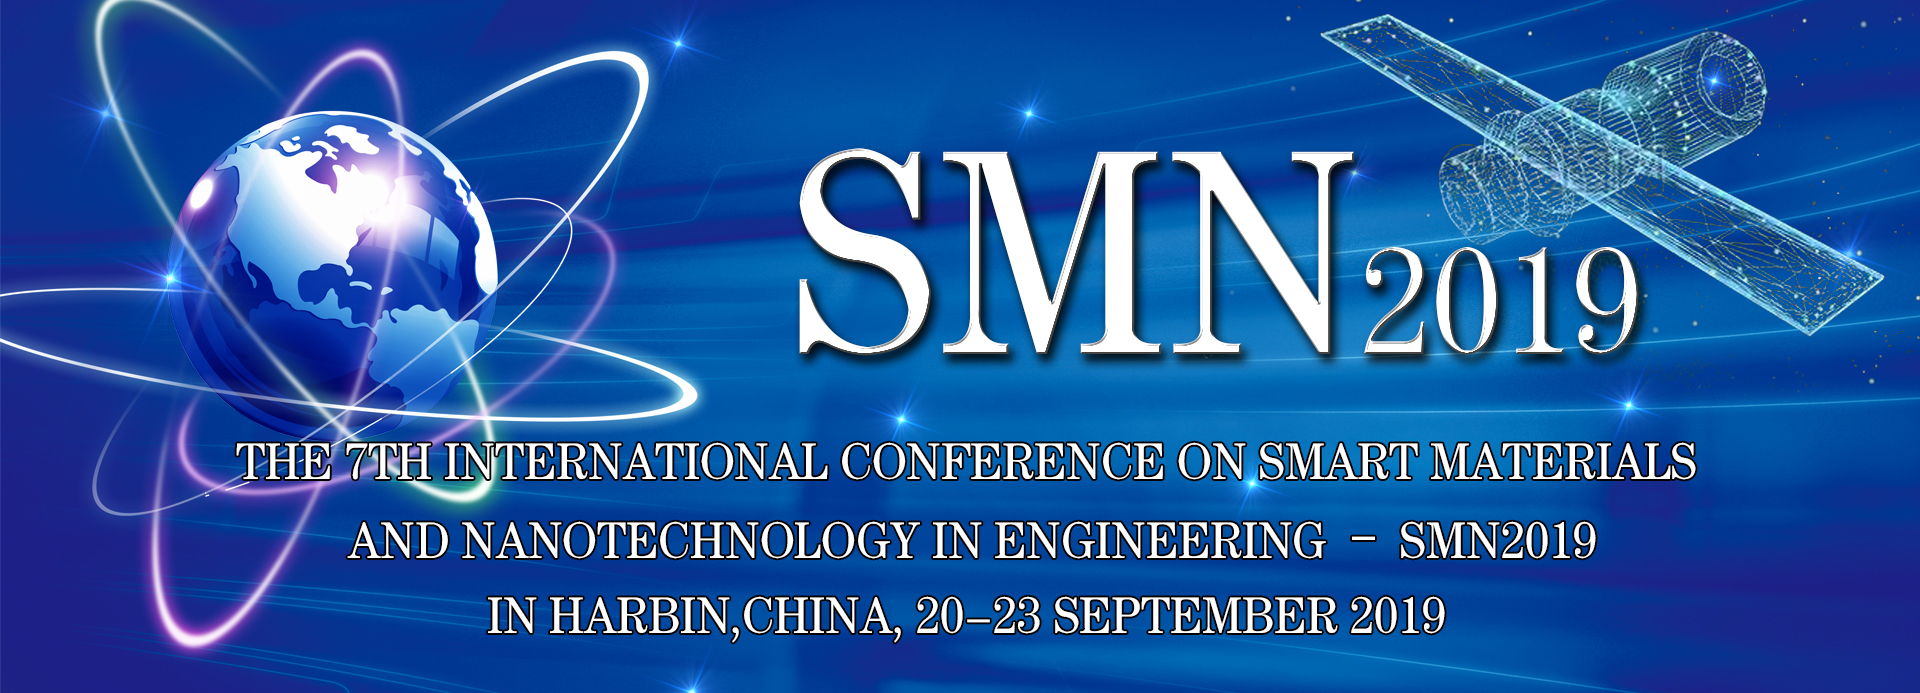 The 7th International Conference on Smart Materials and Nanotechnology in Engineering (SMN 2019)